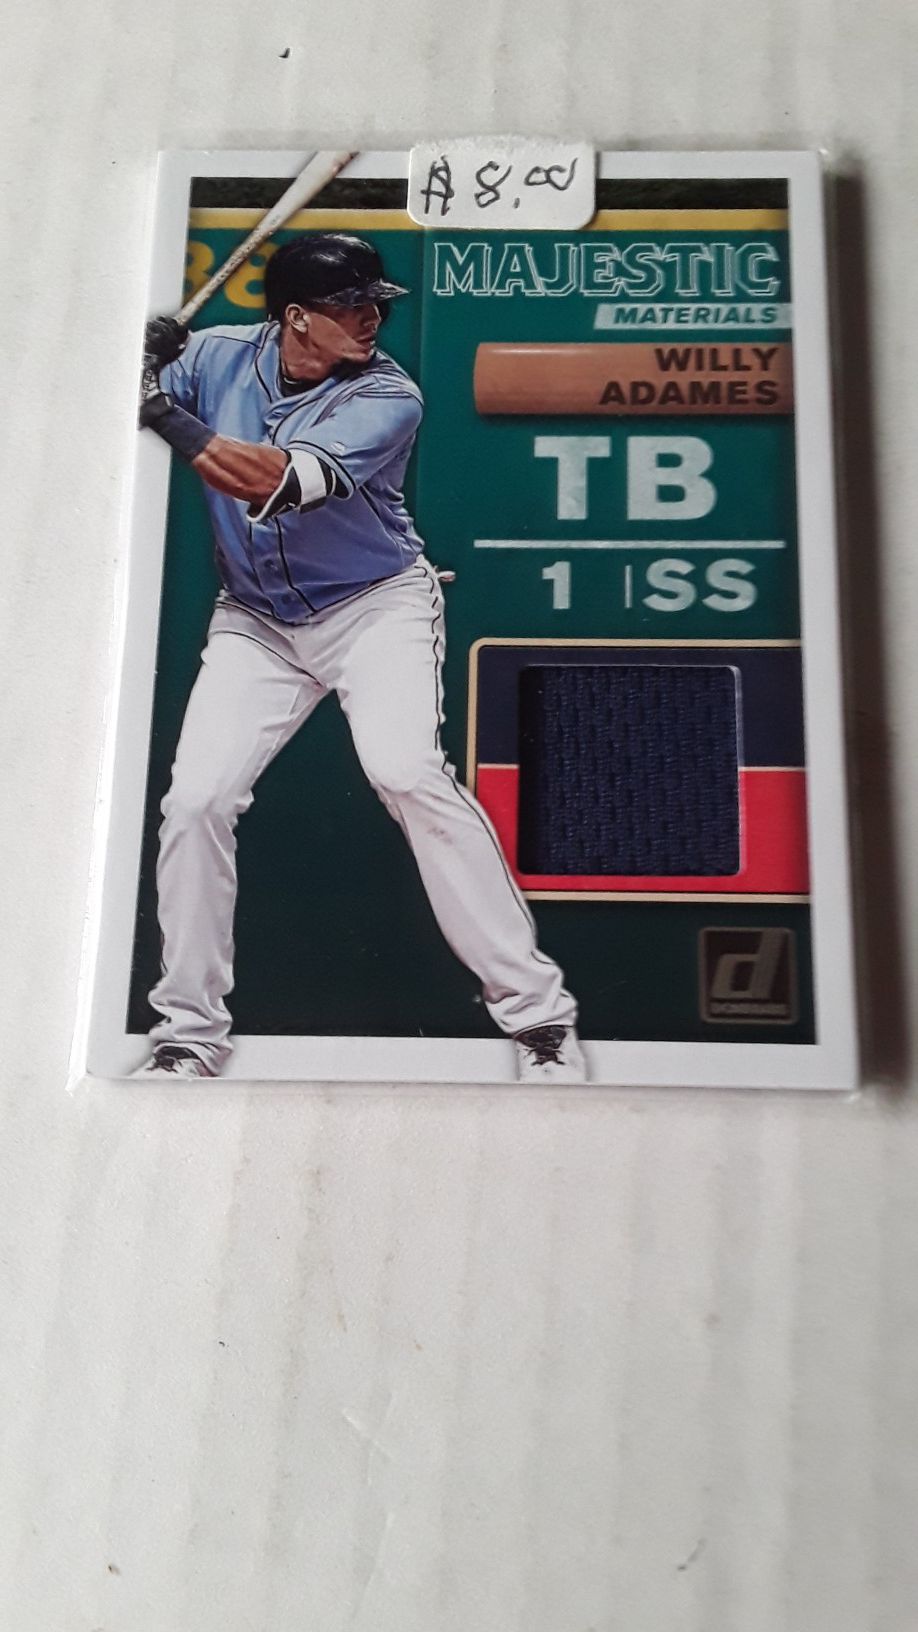 Willy Adames Jersey card.